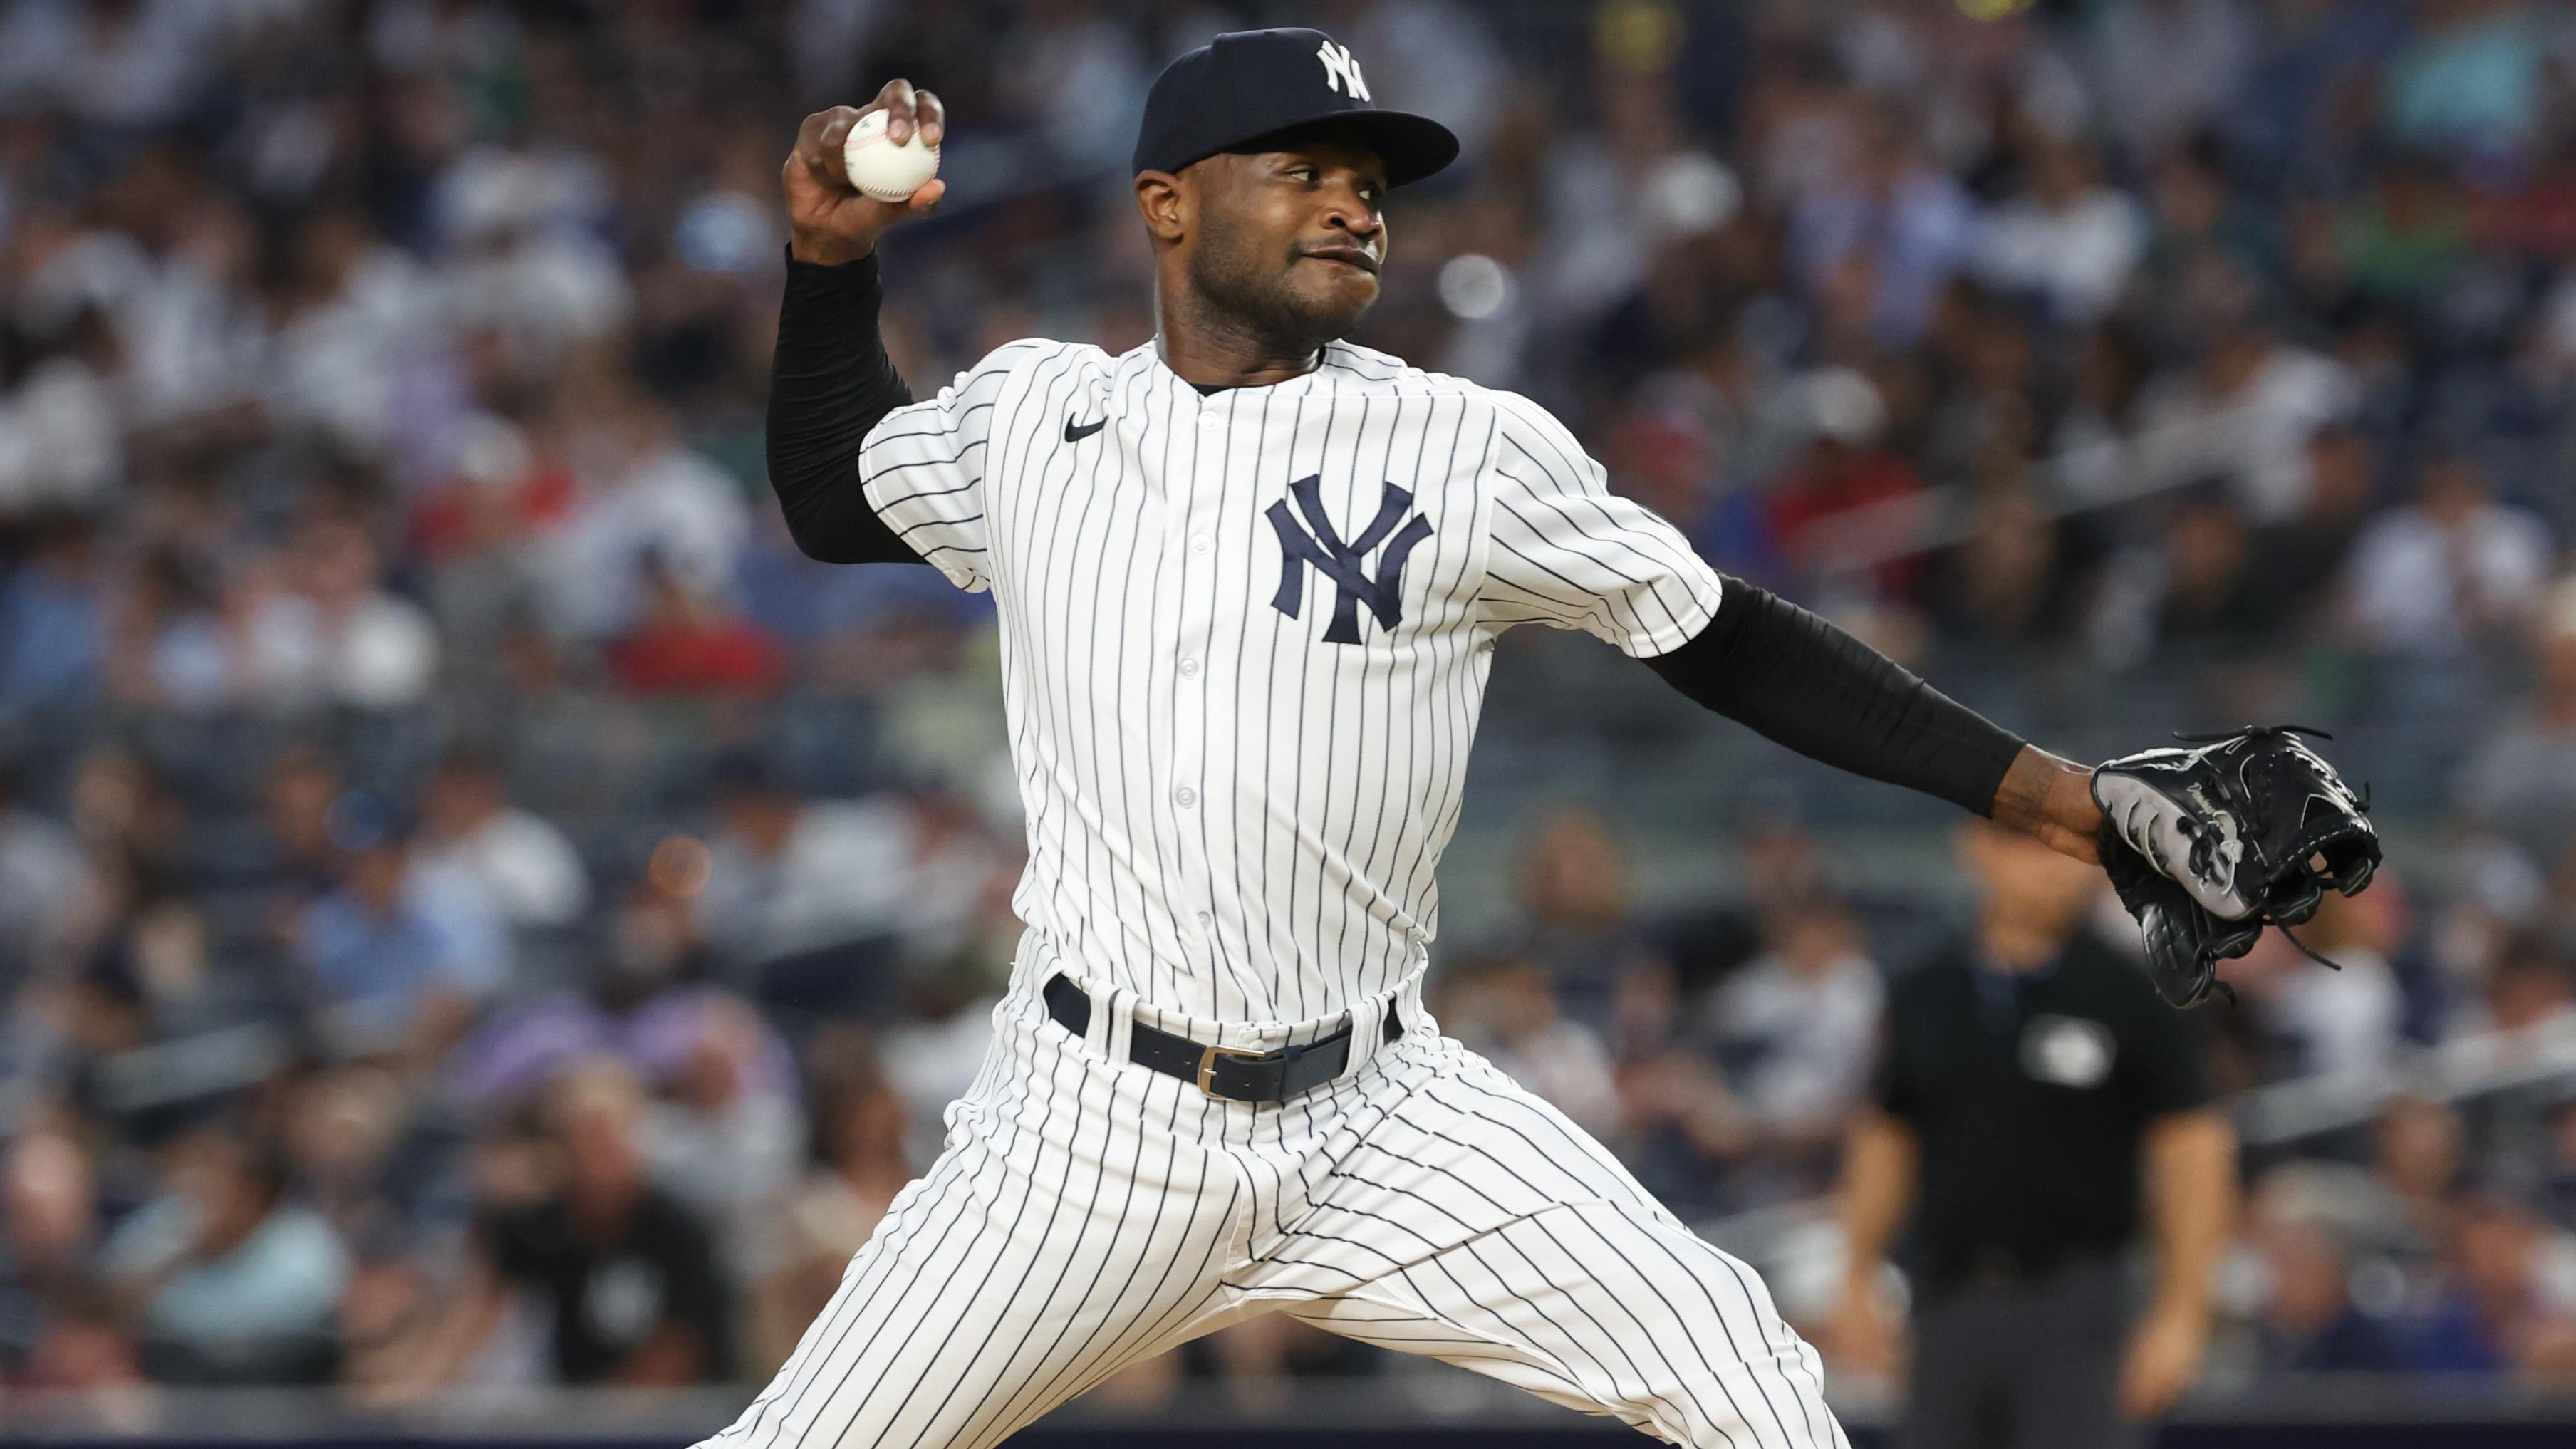 New York Yankees starting pitcher Domingo German (0) delivers a pitch during the seventh inning against the Tampa Bay Rays at Yankee Stadium / Vincent Carchietta - USA TODAY Sports